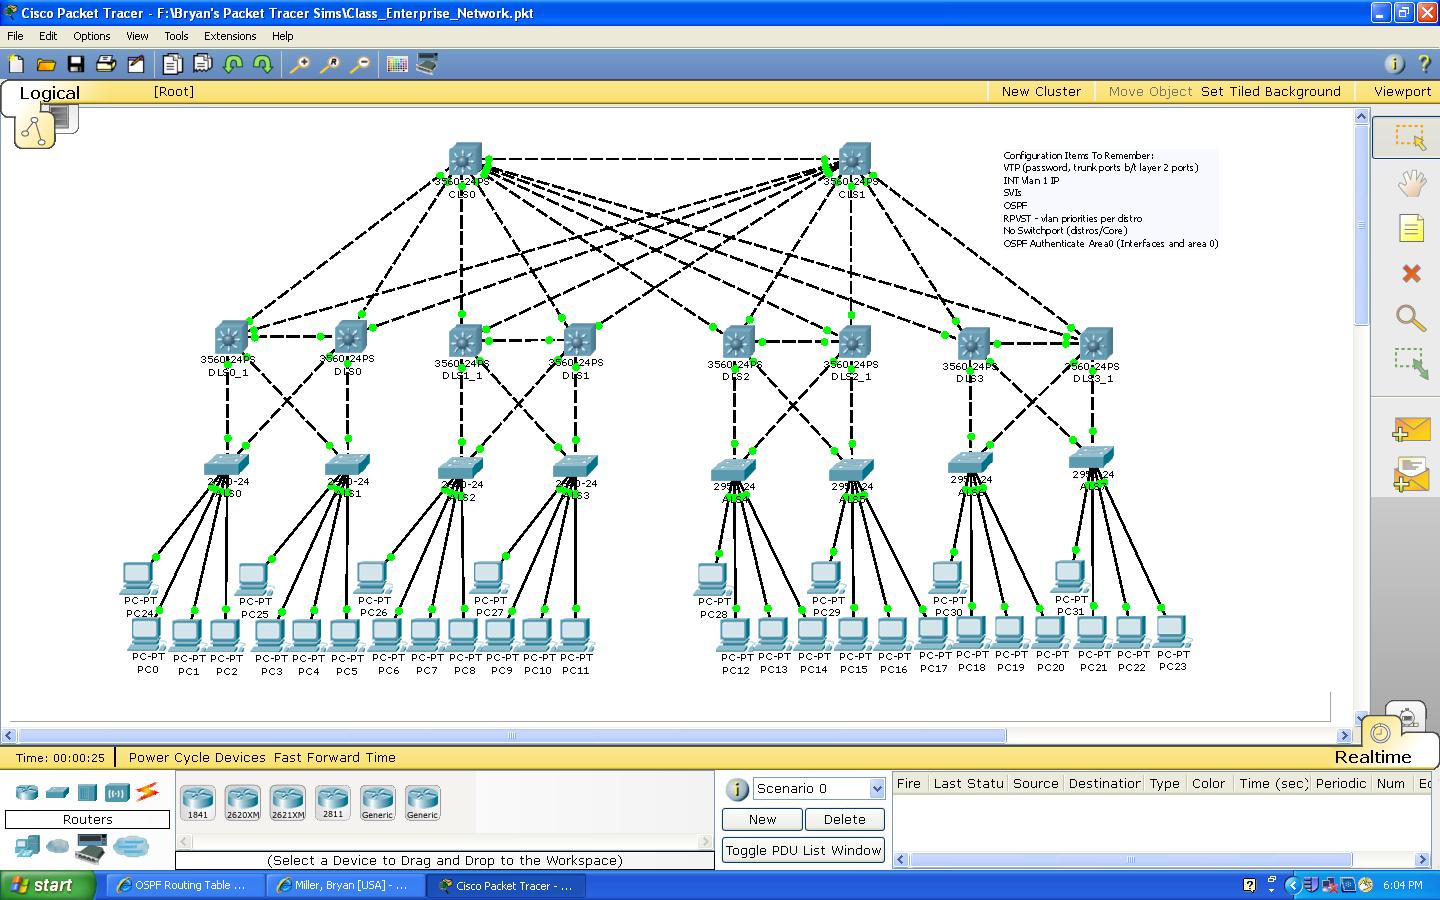 case study on cisco packet tracer